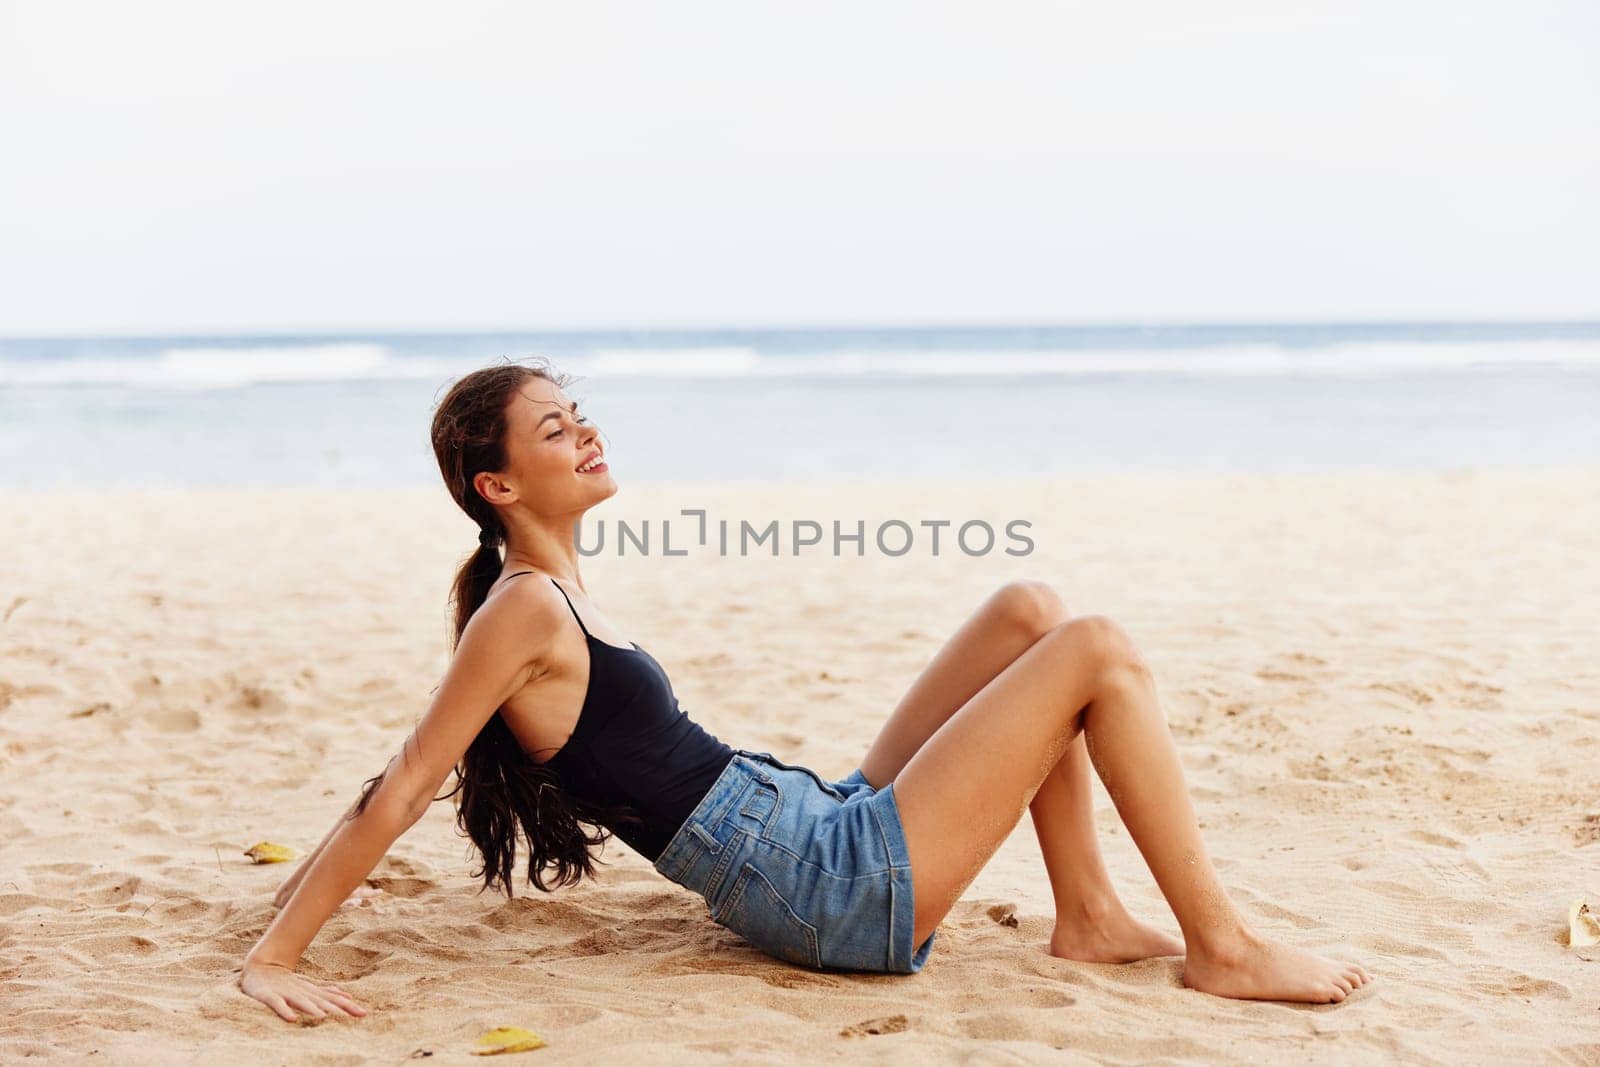 nature woman sea beach freedom sitting travel smile vacation sand female by SHOTPRIME